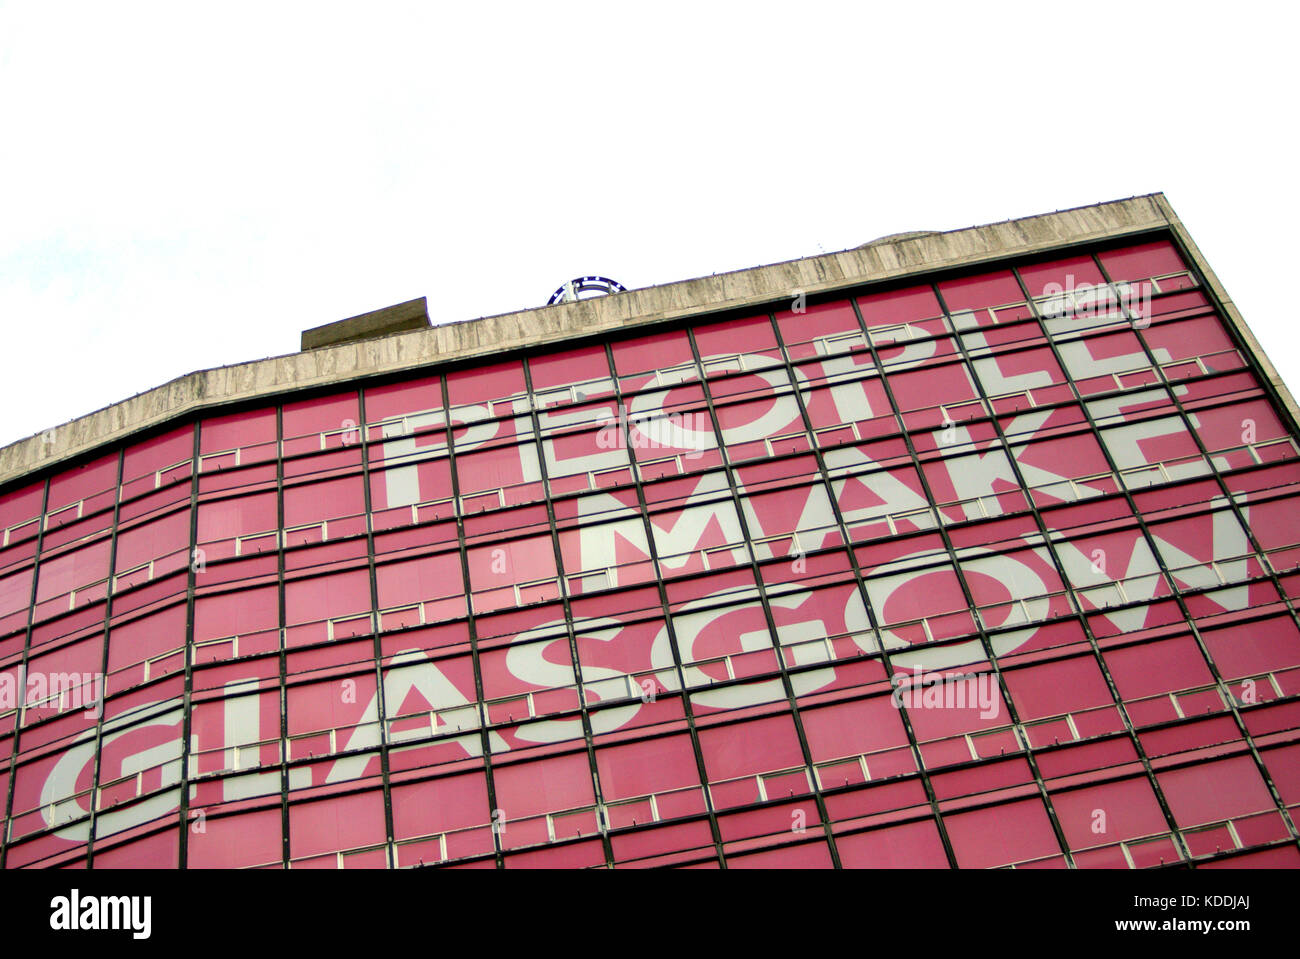 people make Glasgow huge pink sign building north Hanover street Glasgow George square Stock Photo